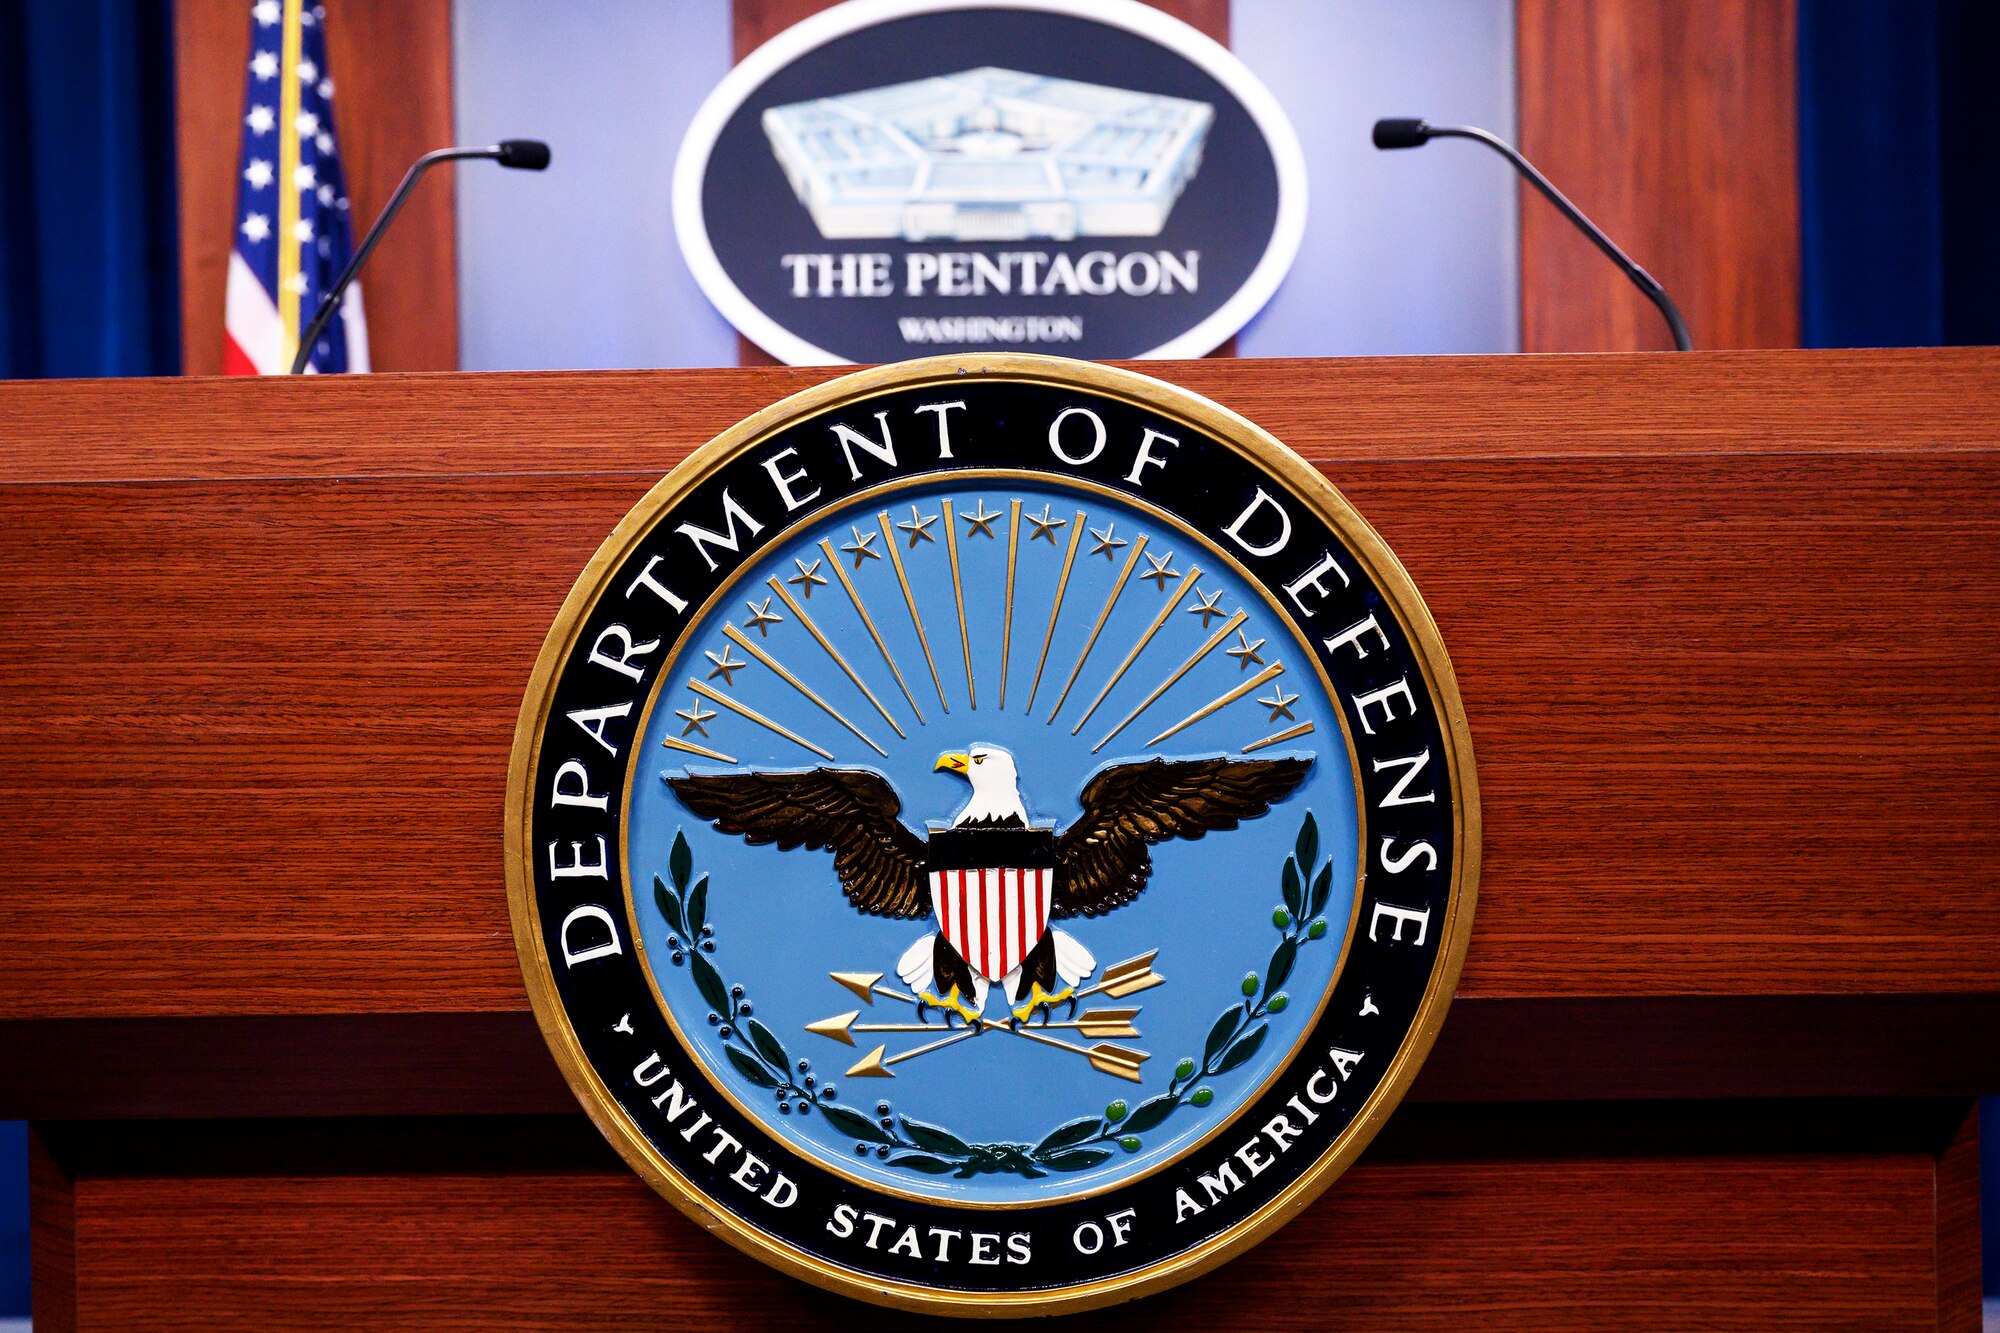 The Defense Department seal adorns a lectern where two microphones stand.